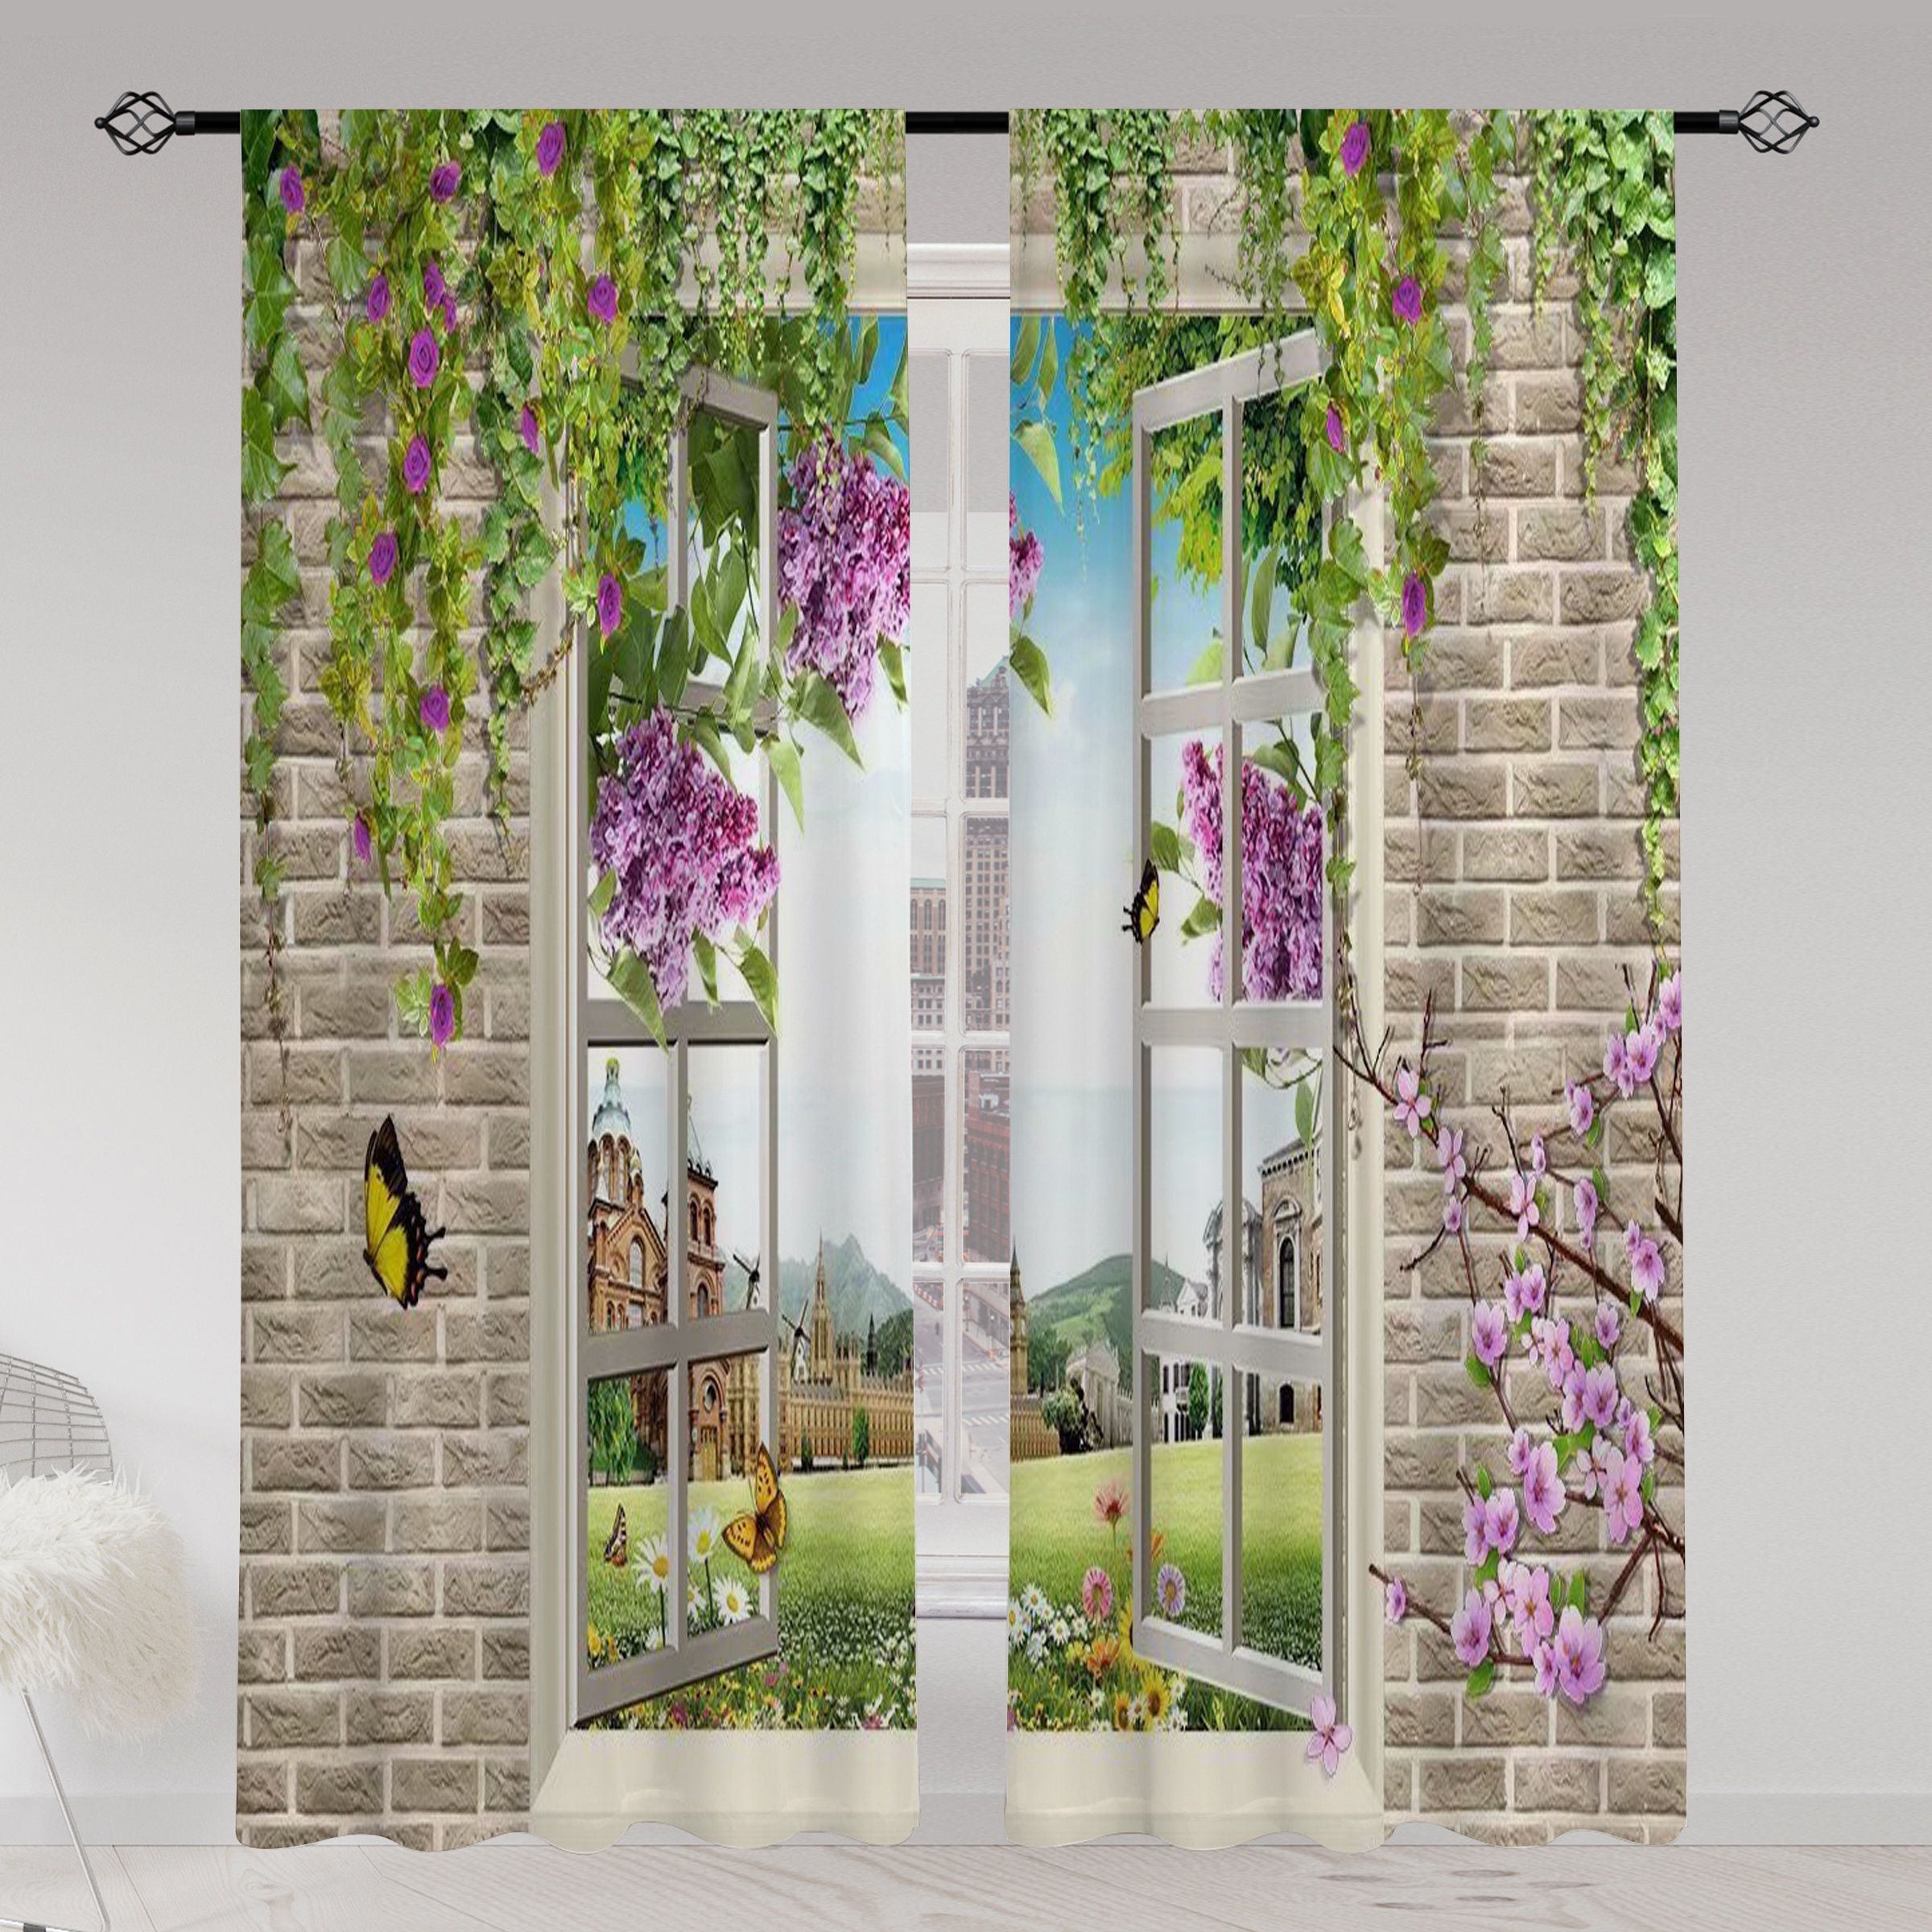 

2pcs, Fake Window Landscape Painting Violet Outside The Window Printed Translucent Curtains, Multi-scene Polyester Rod Pocket Curtain For Living Room Gaming Room Bedroom Home Decor Party Supplies